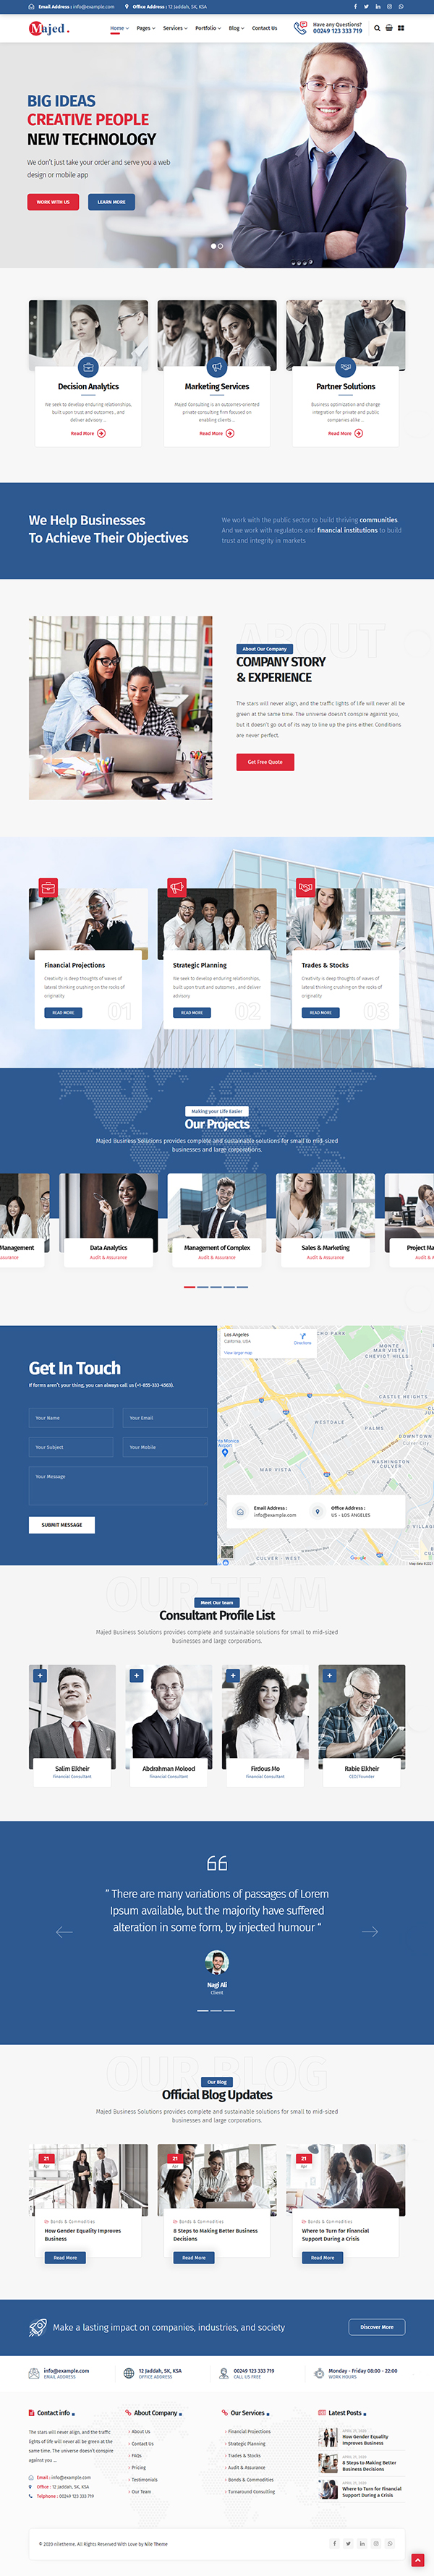 Majed - Business Consulting WordPress Theme